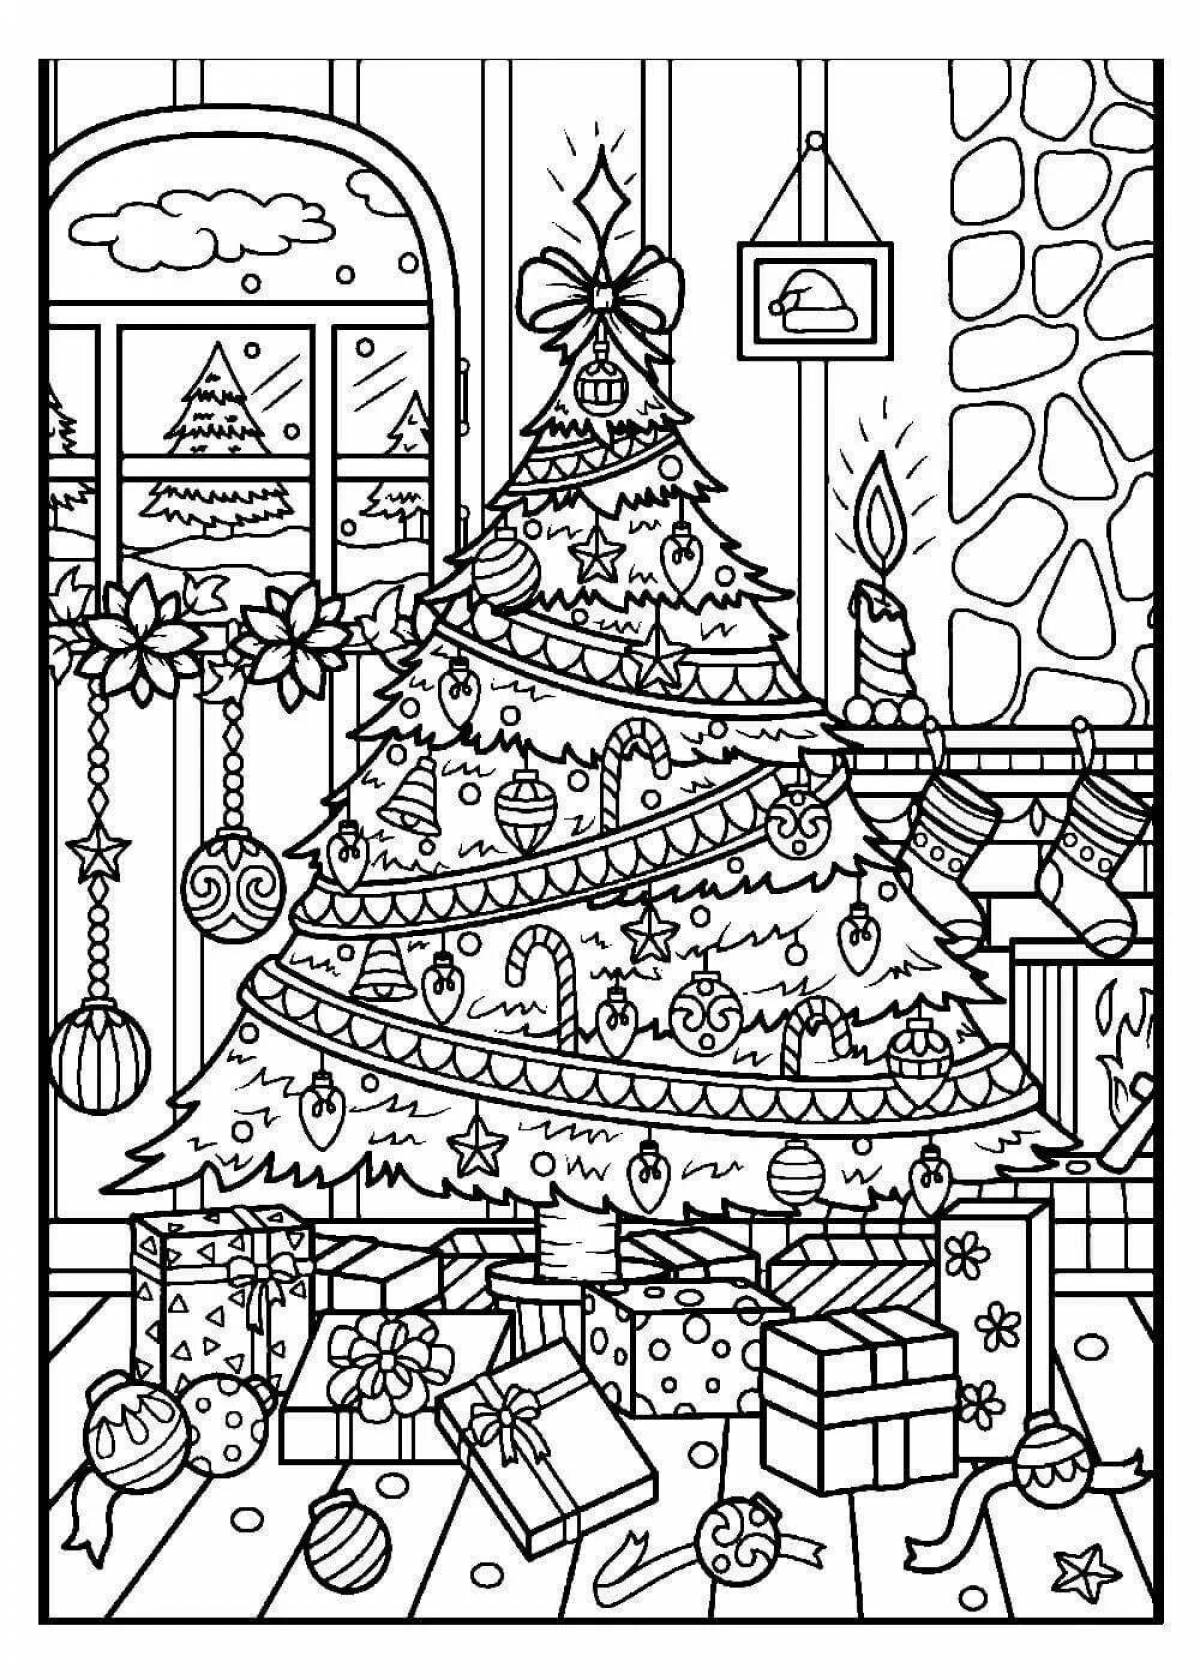 Inviting Christmas coloring book for teens